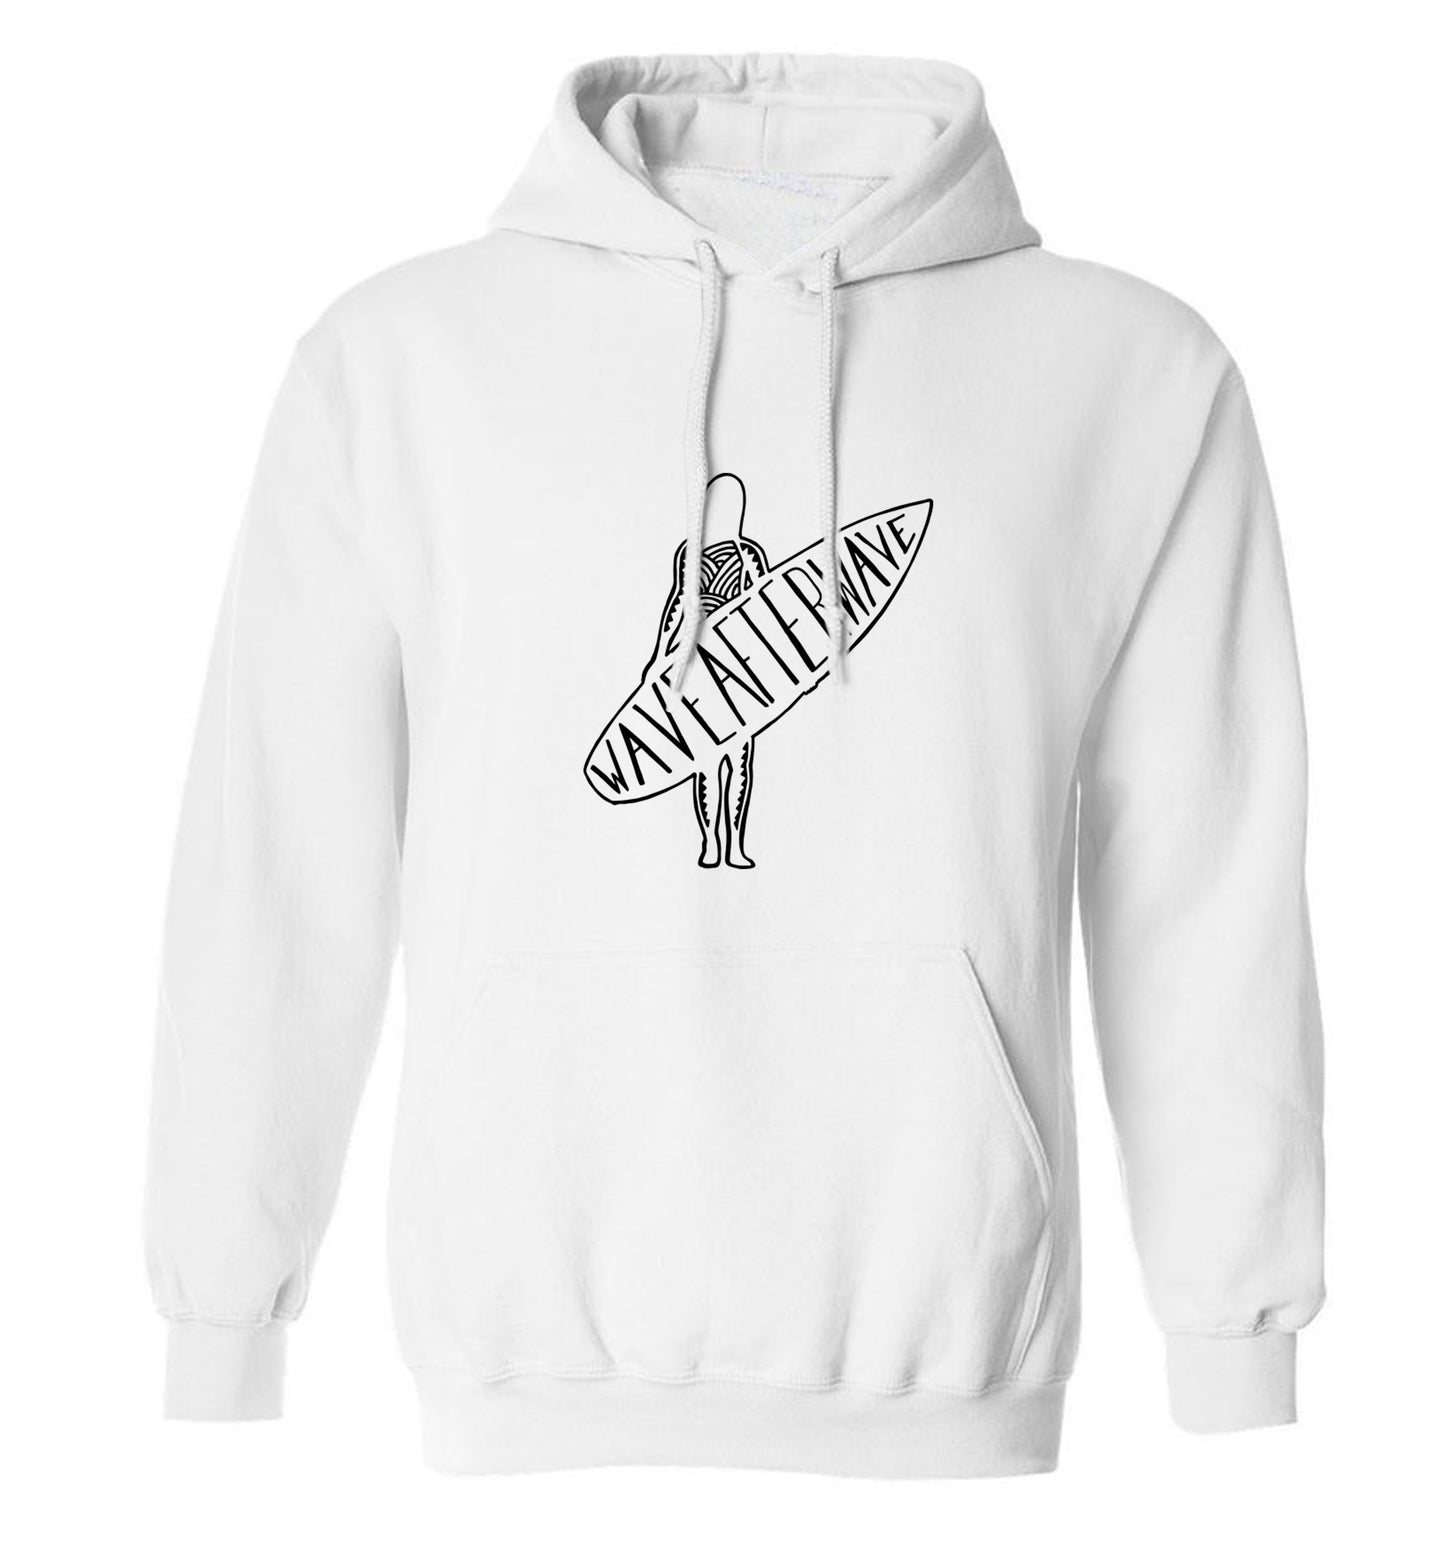 Wave after wave adults unisex white hoodie 2XL